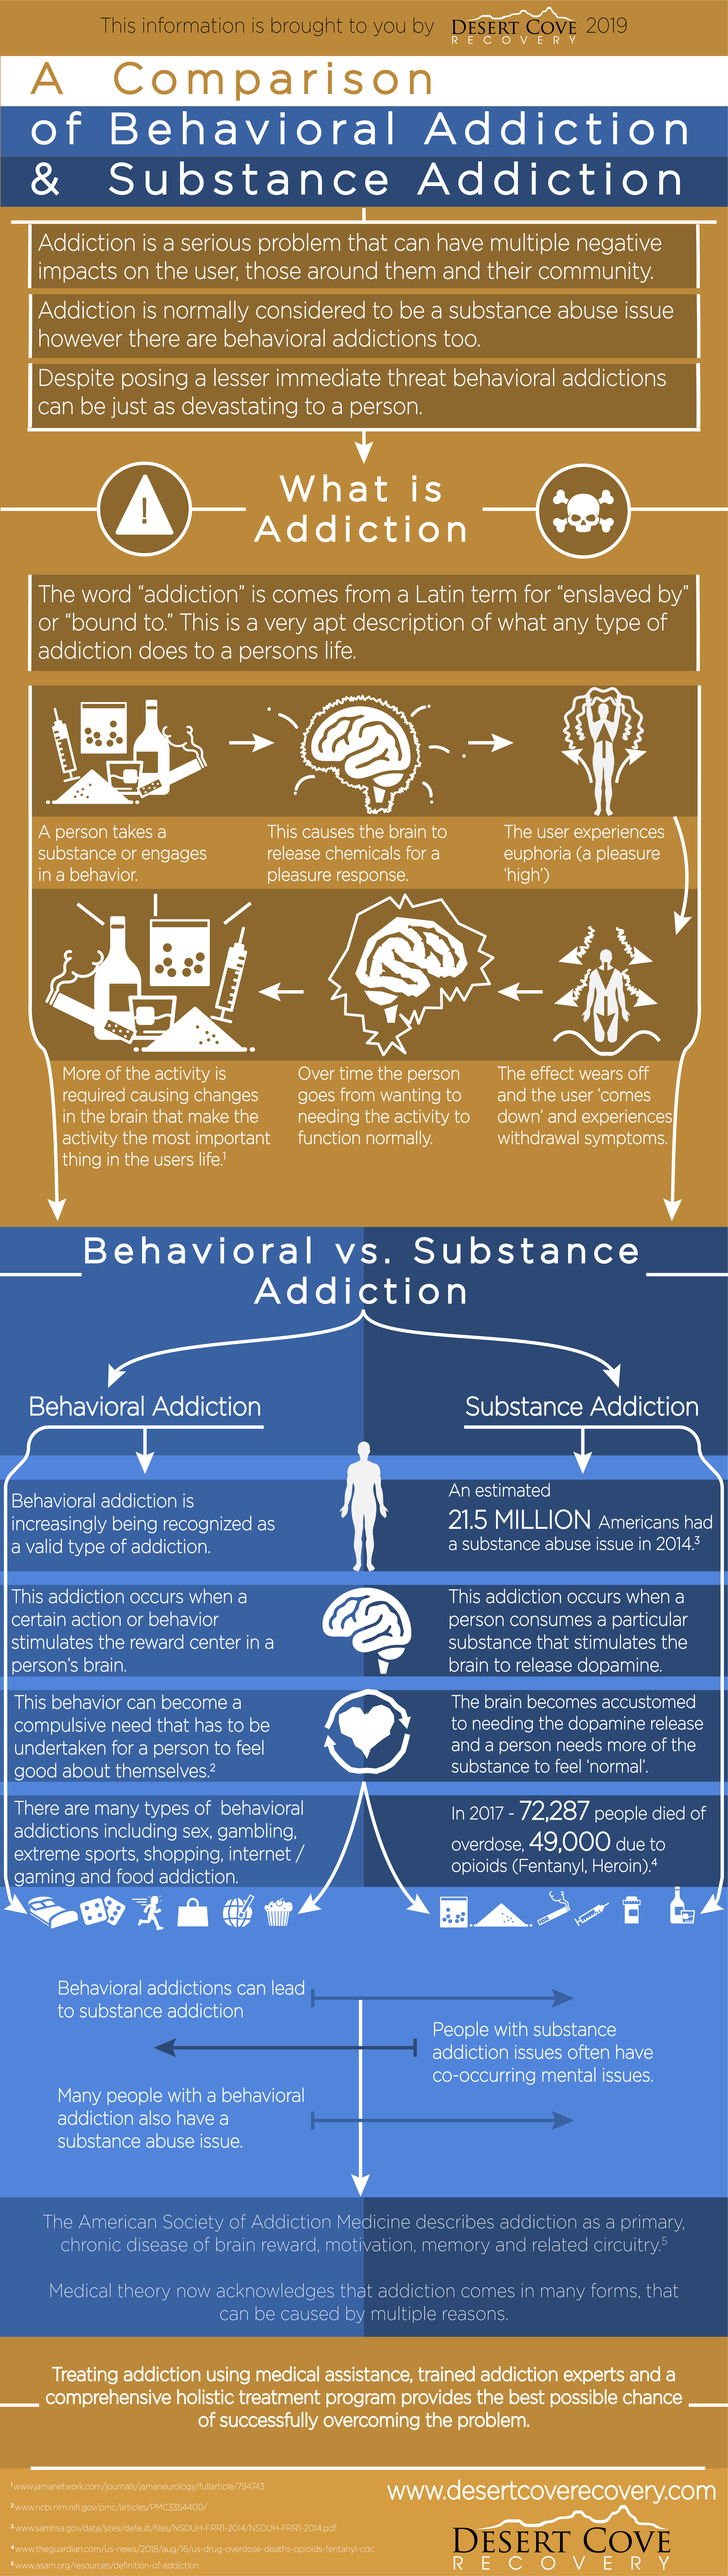 A Comparison of Behavioral Addiction and Substance Addiction